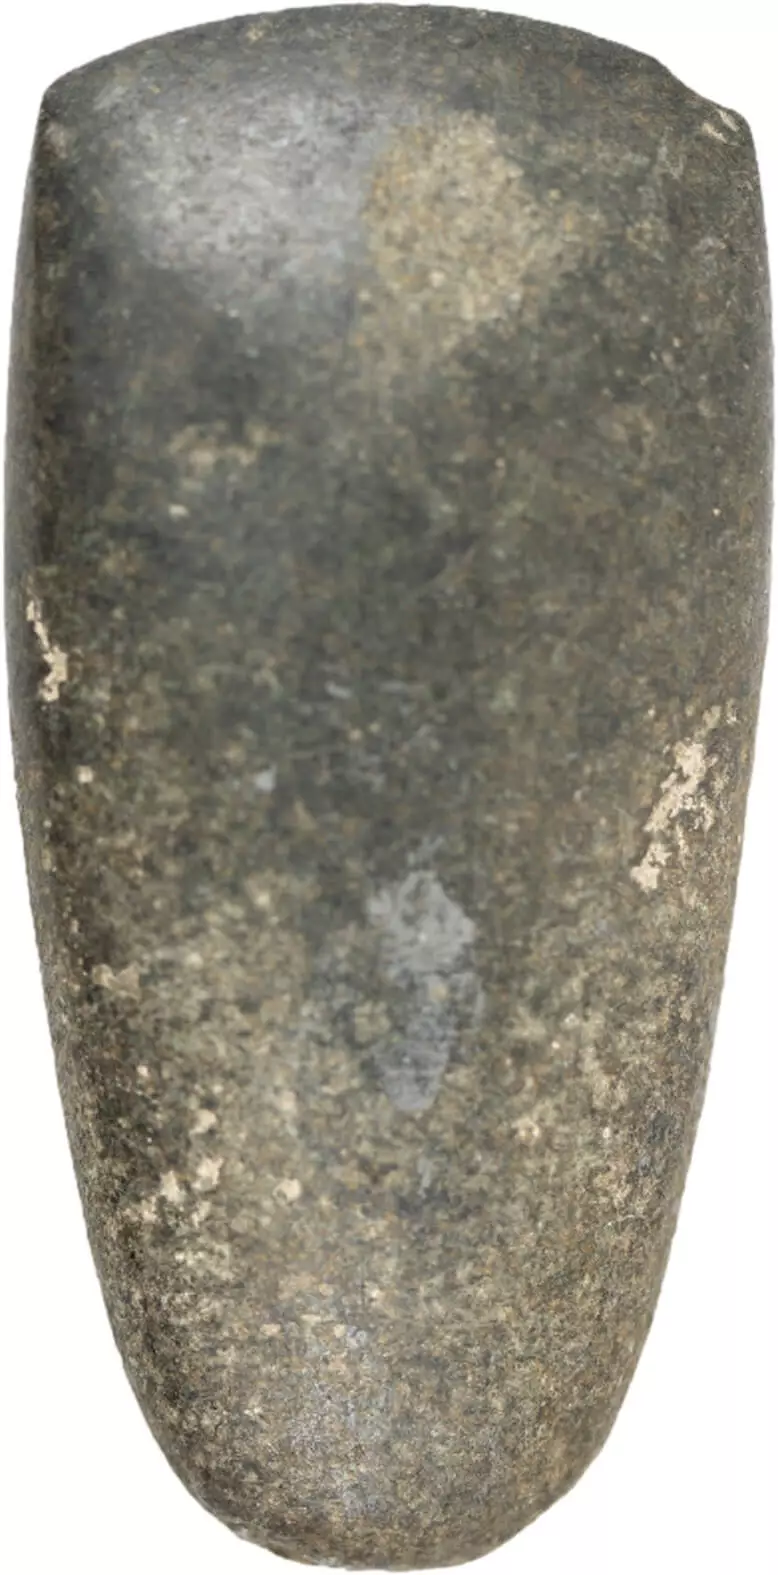 Dark gray stone, wider edge is ground to an edge, front is more polished than rounded back. 2.5 inches wide, 5.2 inches long